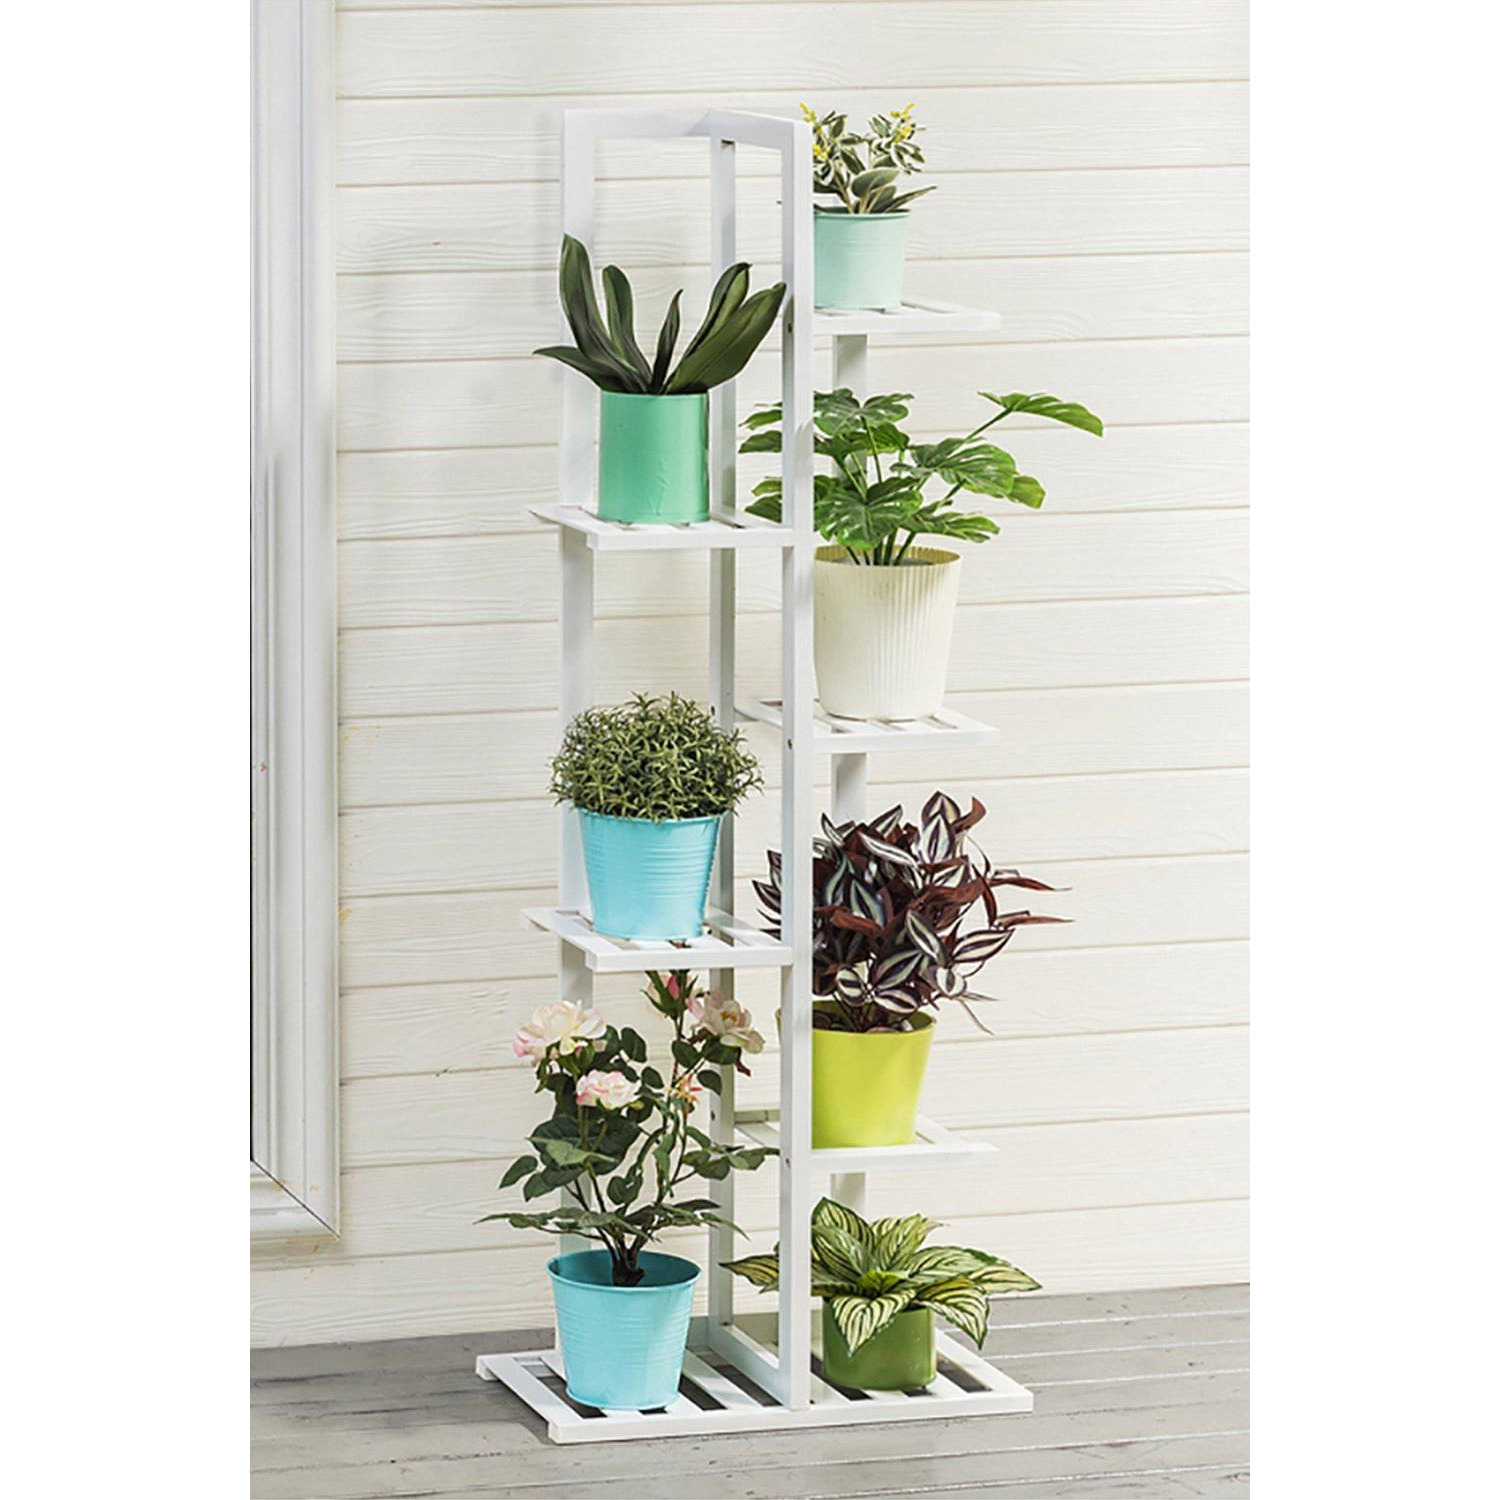 Rustic Wooden Multi-Tiered Potted Plant Stand - image 1